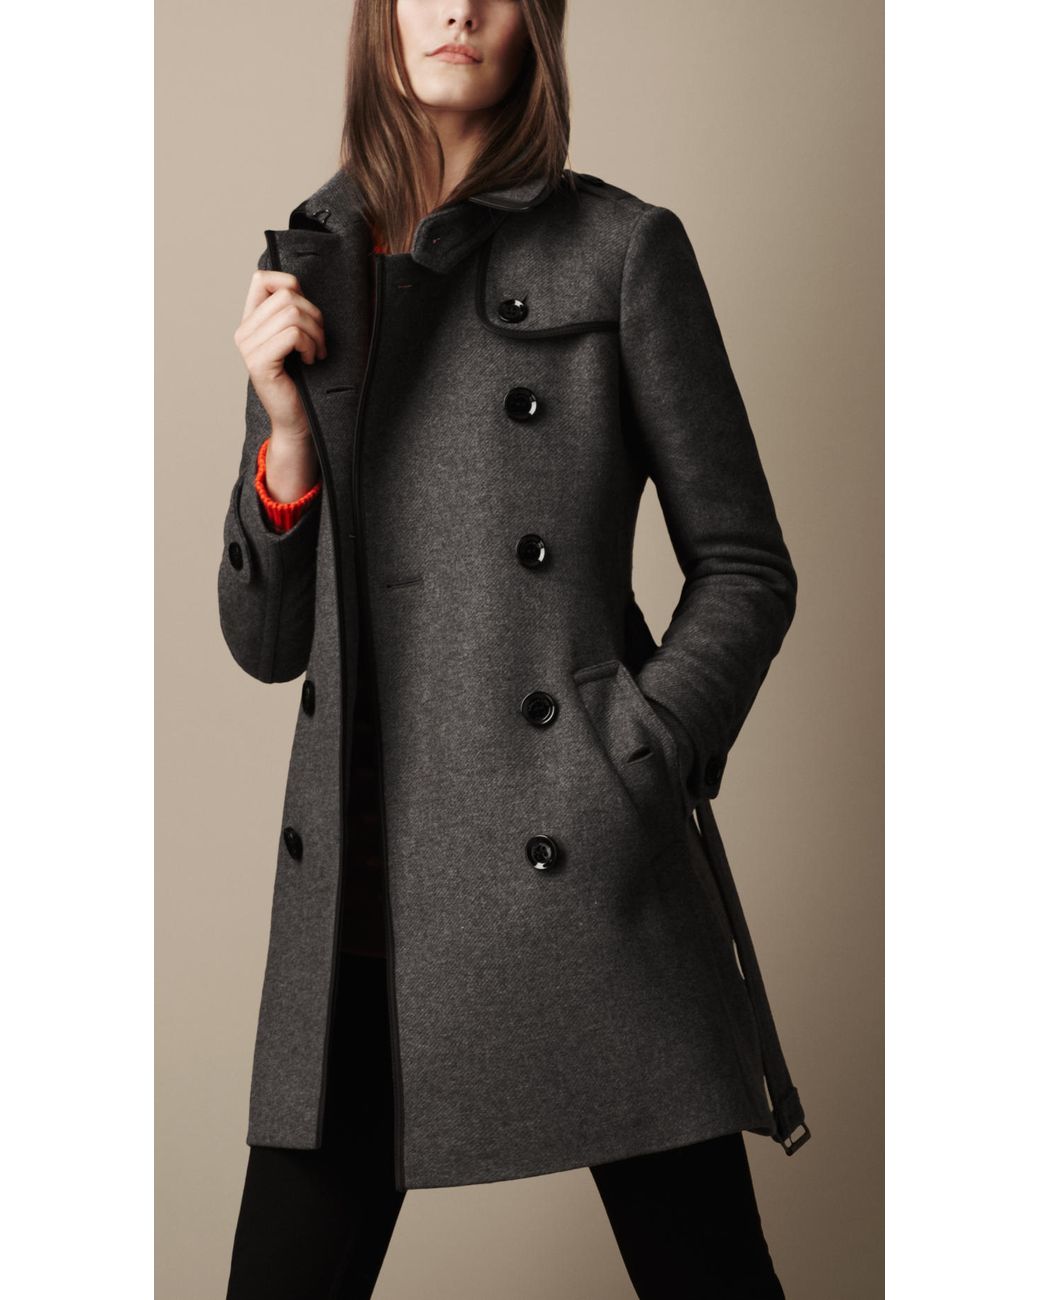 Burberry Brit Midlength Woven Wool Blend Trench Coat in Grey | Lyst UK